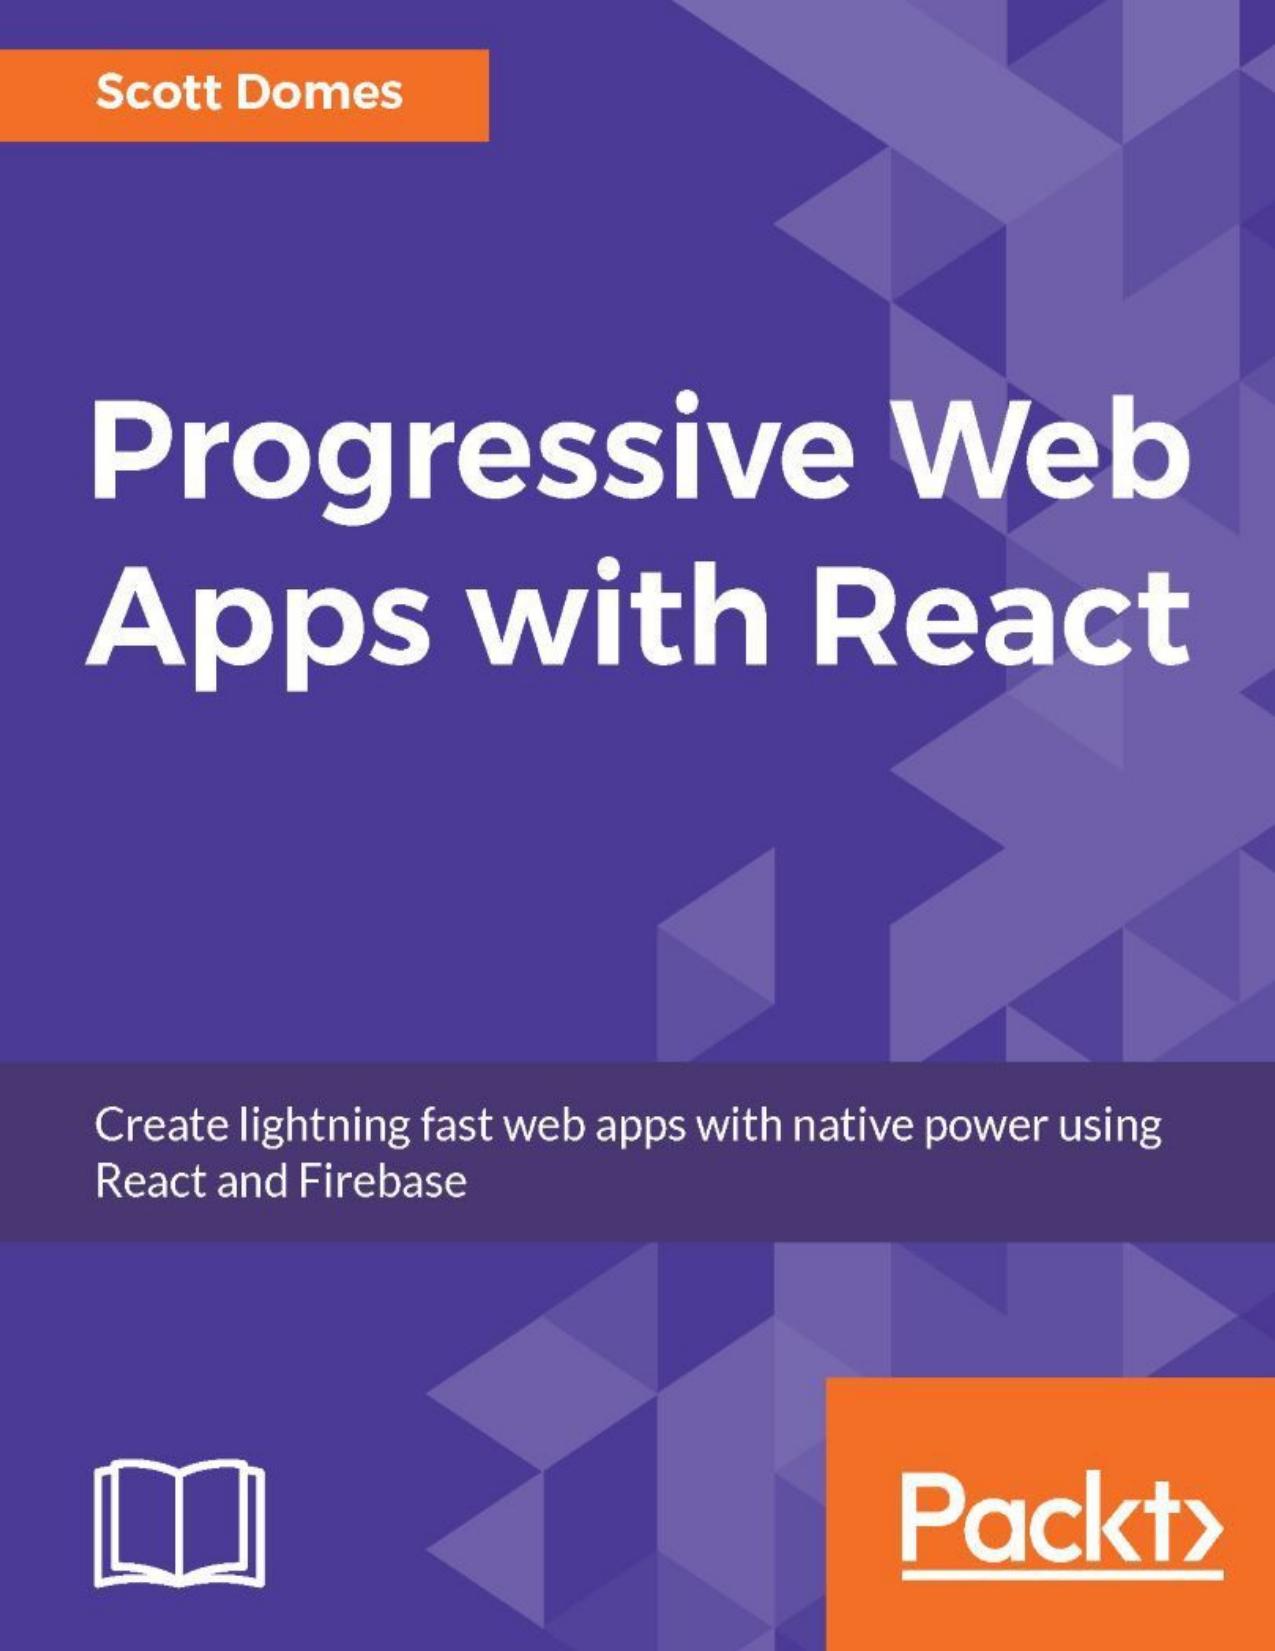 Progressive Web Apps with React: Create Lightning Fast Web Apps with Native Power using React and Firebase